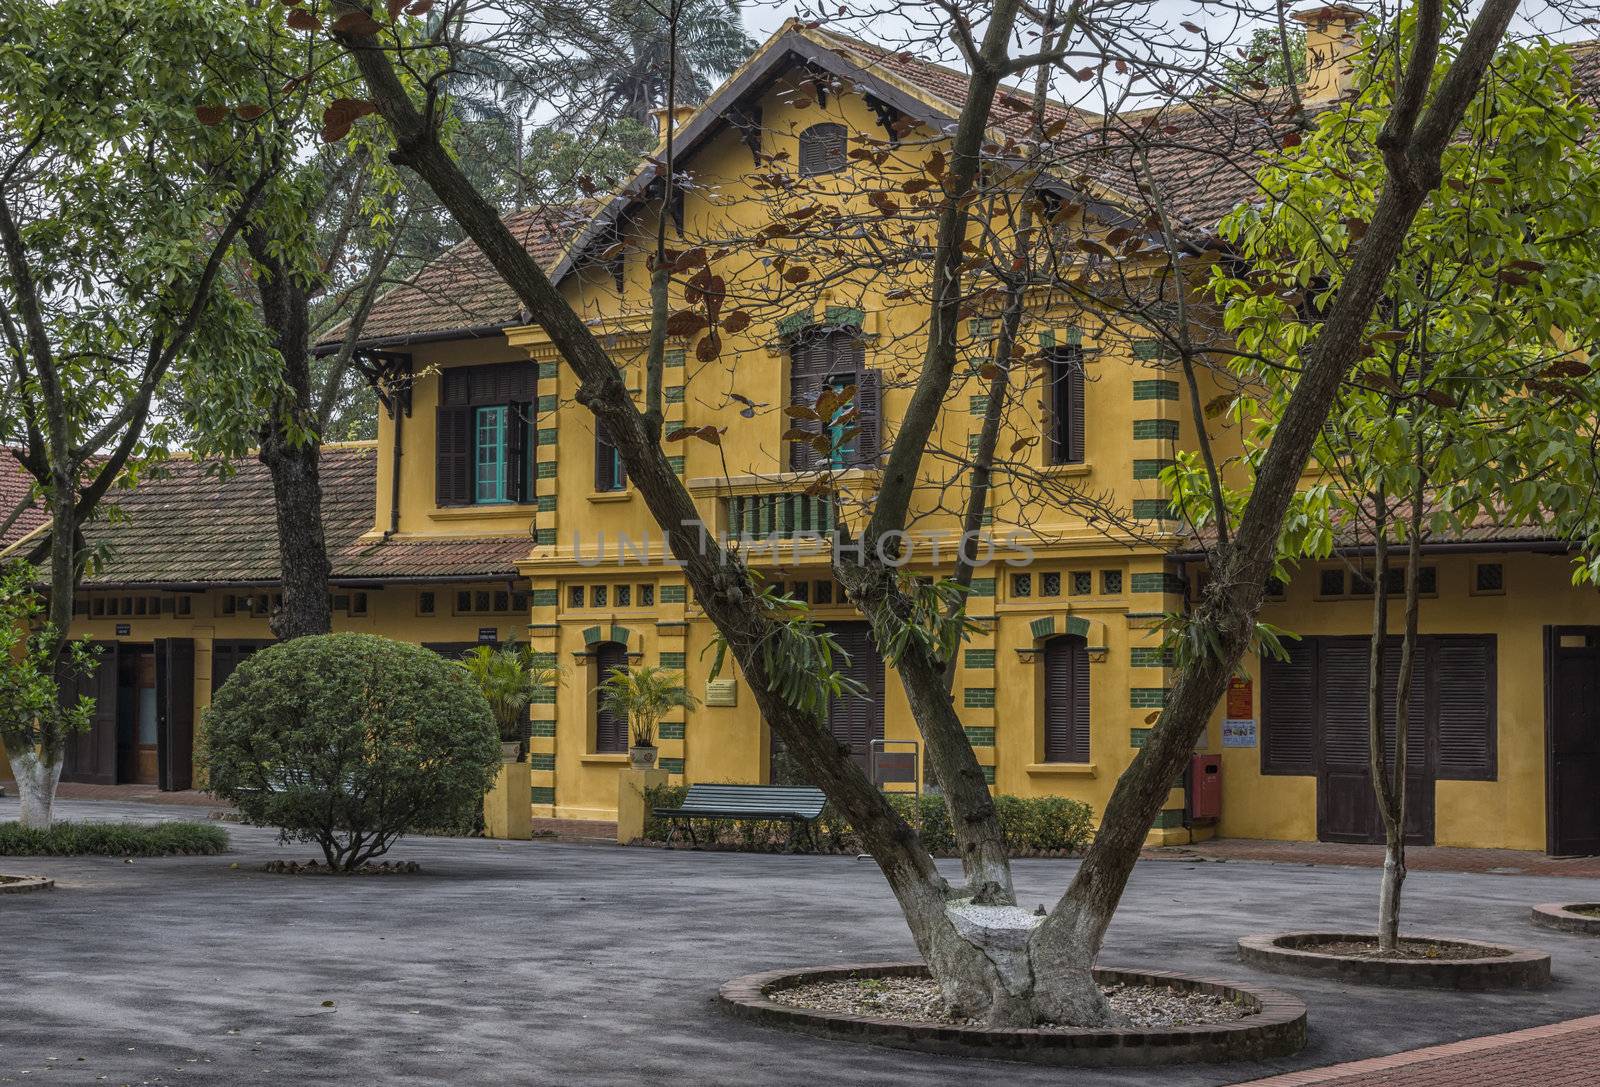 Vietnam Hanoi - March 2012: House of Ho Chi Minh in park by Claudine